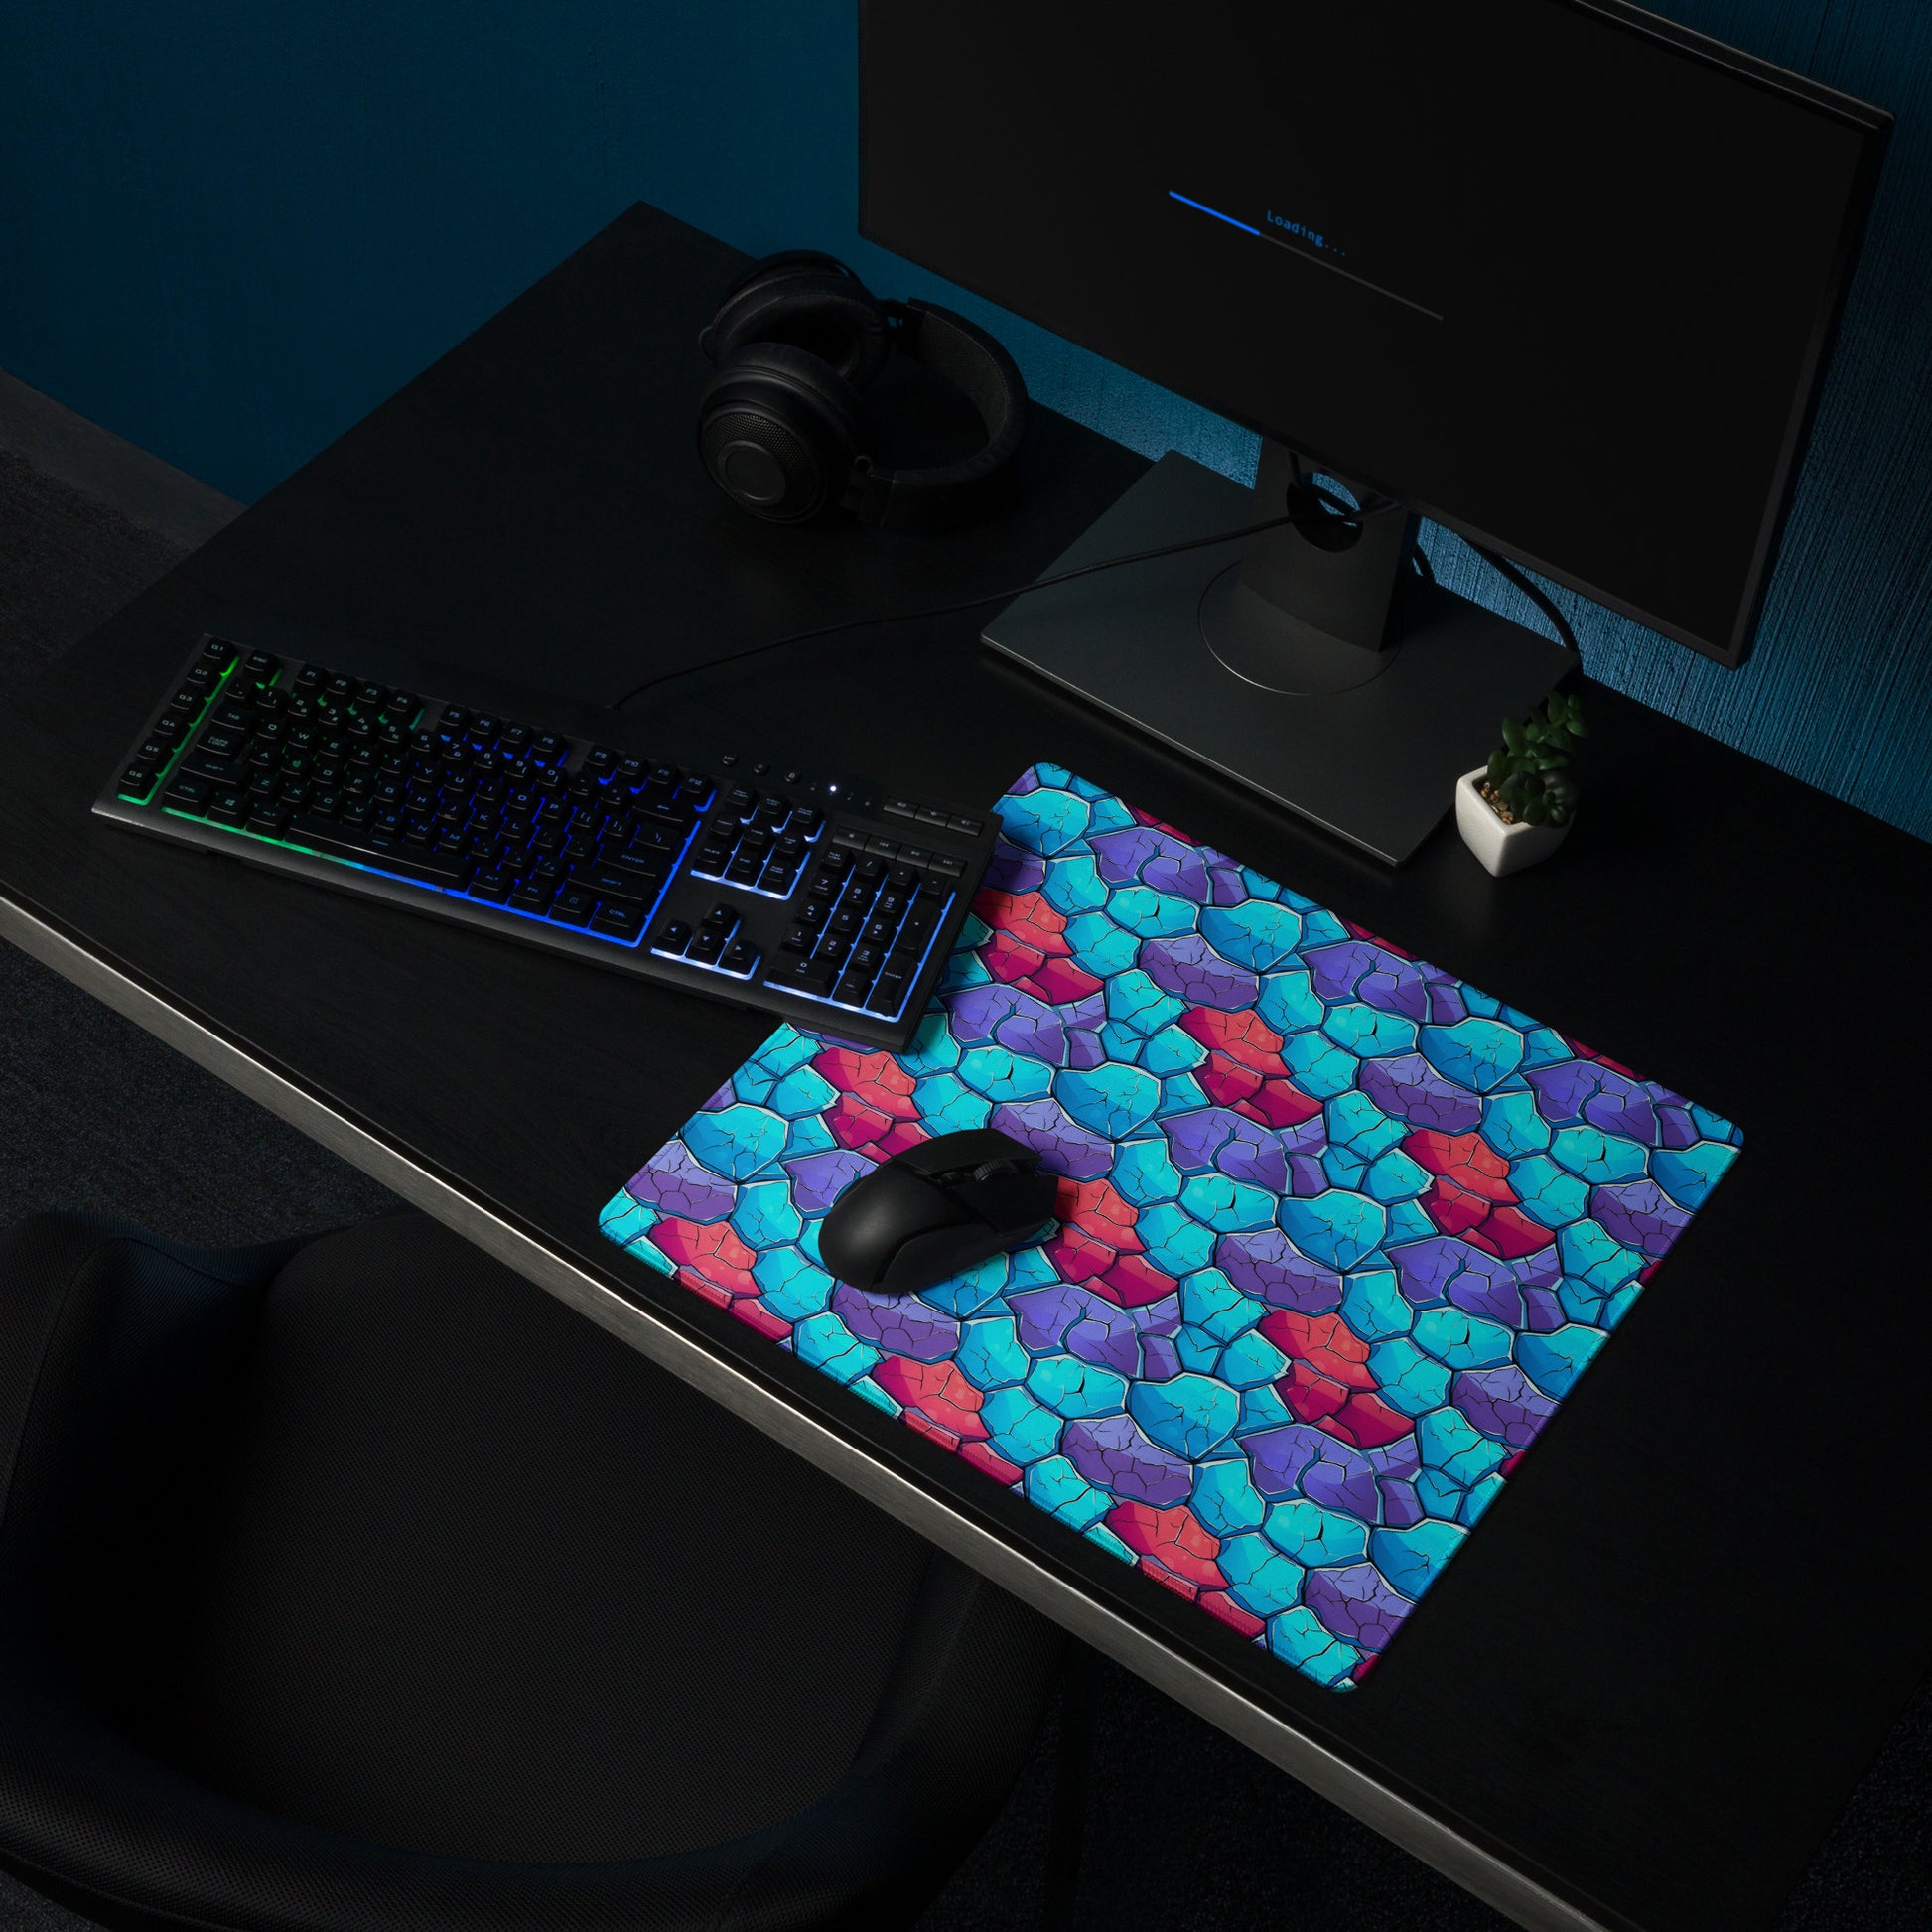 An 18" x 16" gaming desk pad with blue, red, and purple crystals. It sits on a black desk with a keyboard, monitor, and mouse.